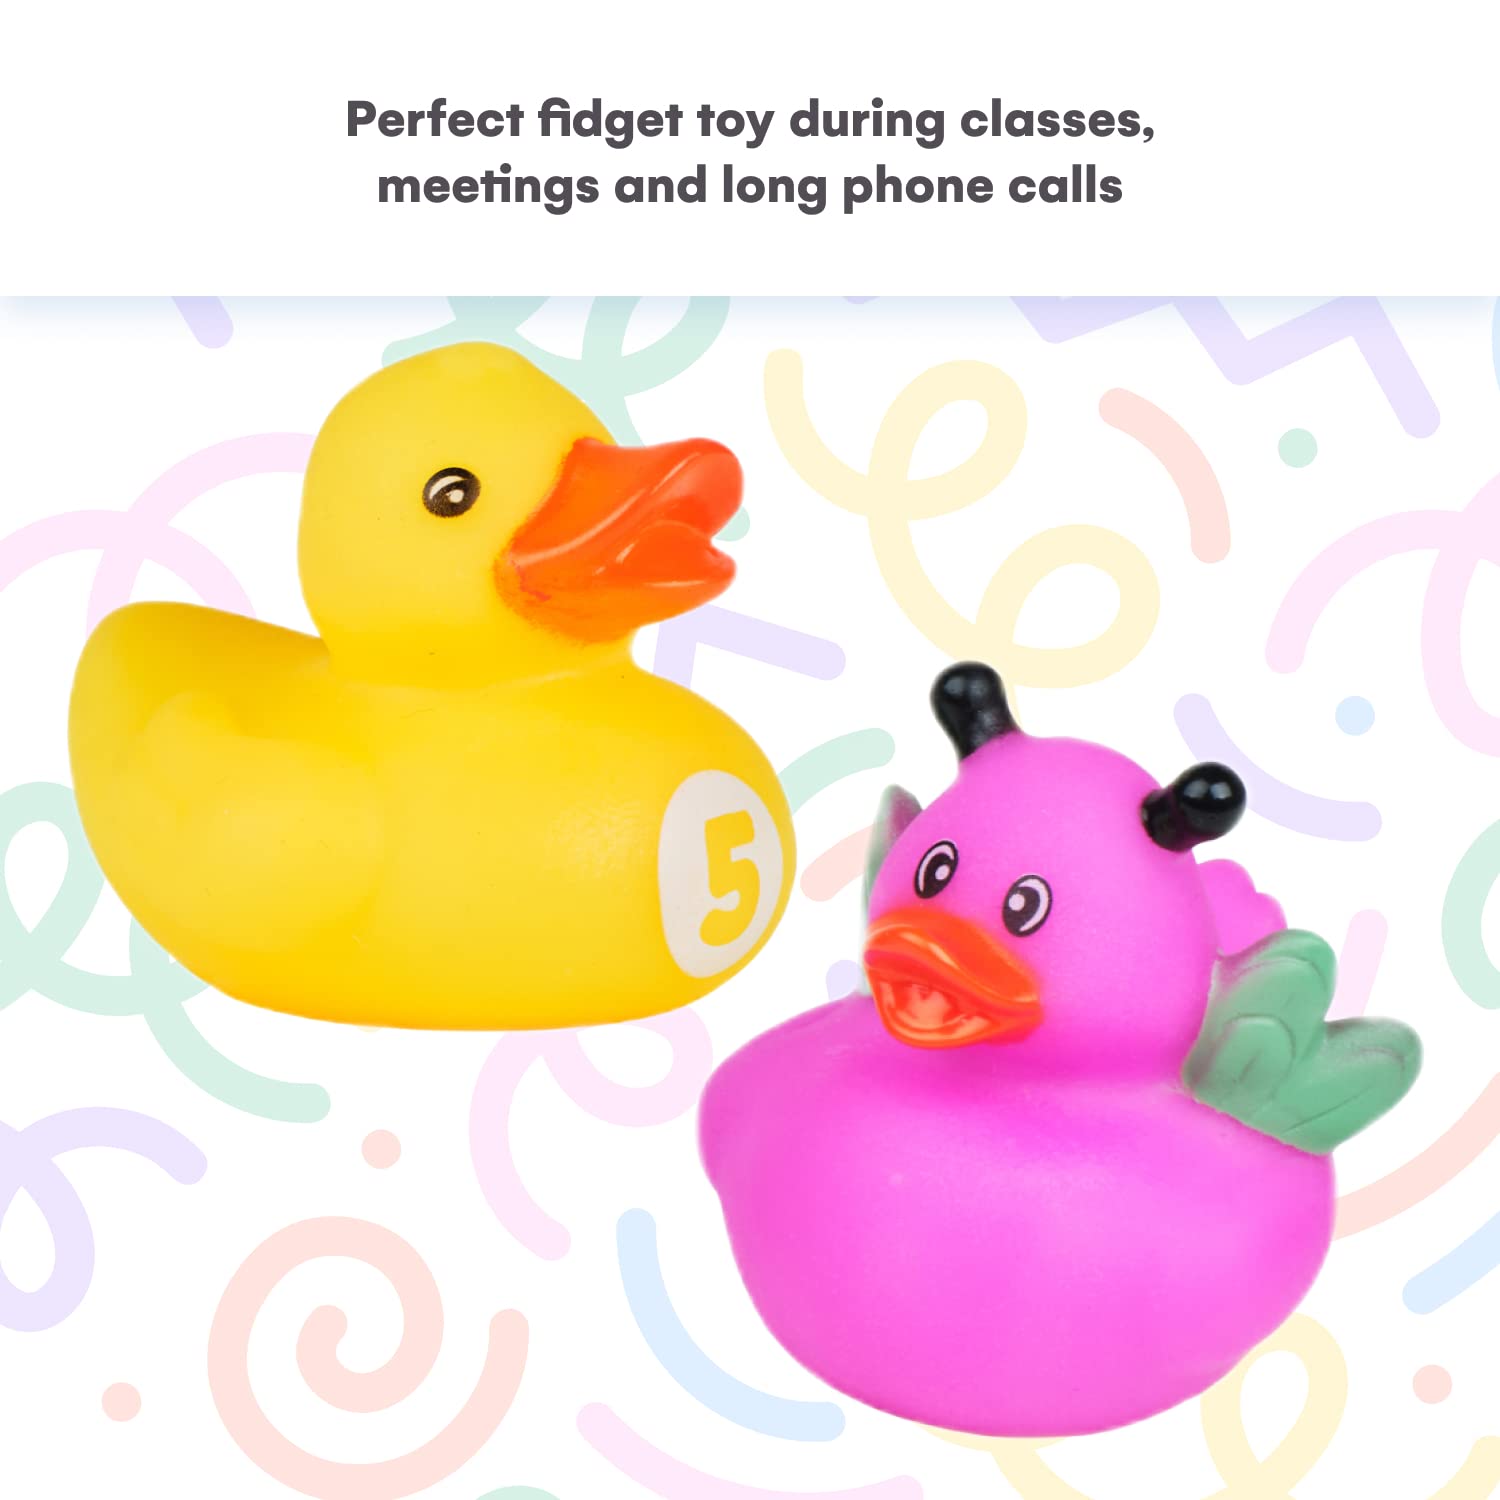 Kicko Assorted Rubber Ducks in Bulk - 50 Pack - 2 Inches - for Kids, Sensory Play, Stress Relief, Stocking Stuffers, Classroom Prizes, Decorations, Supplies, Holidays, Pinata Filler, and Rewards